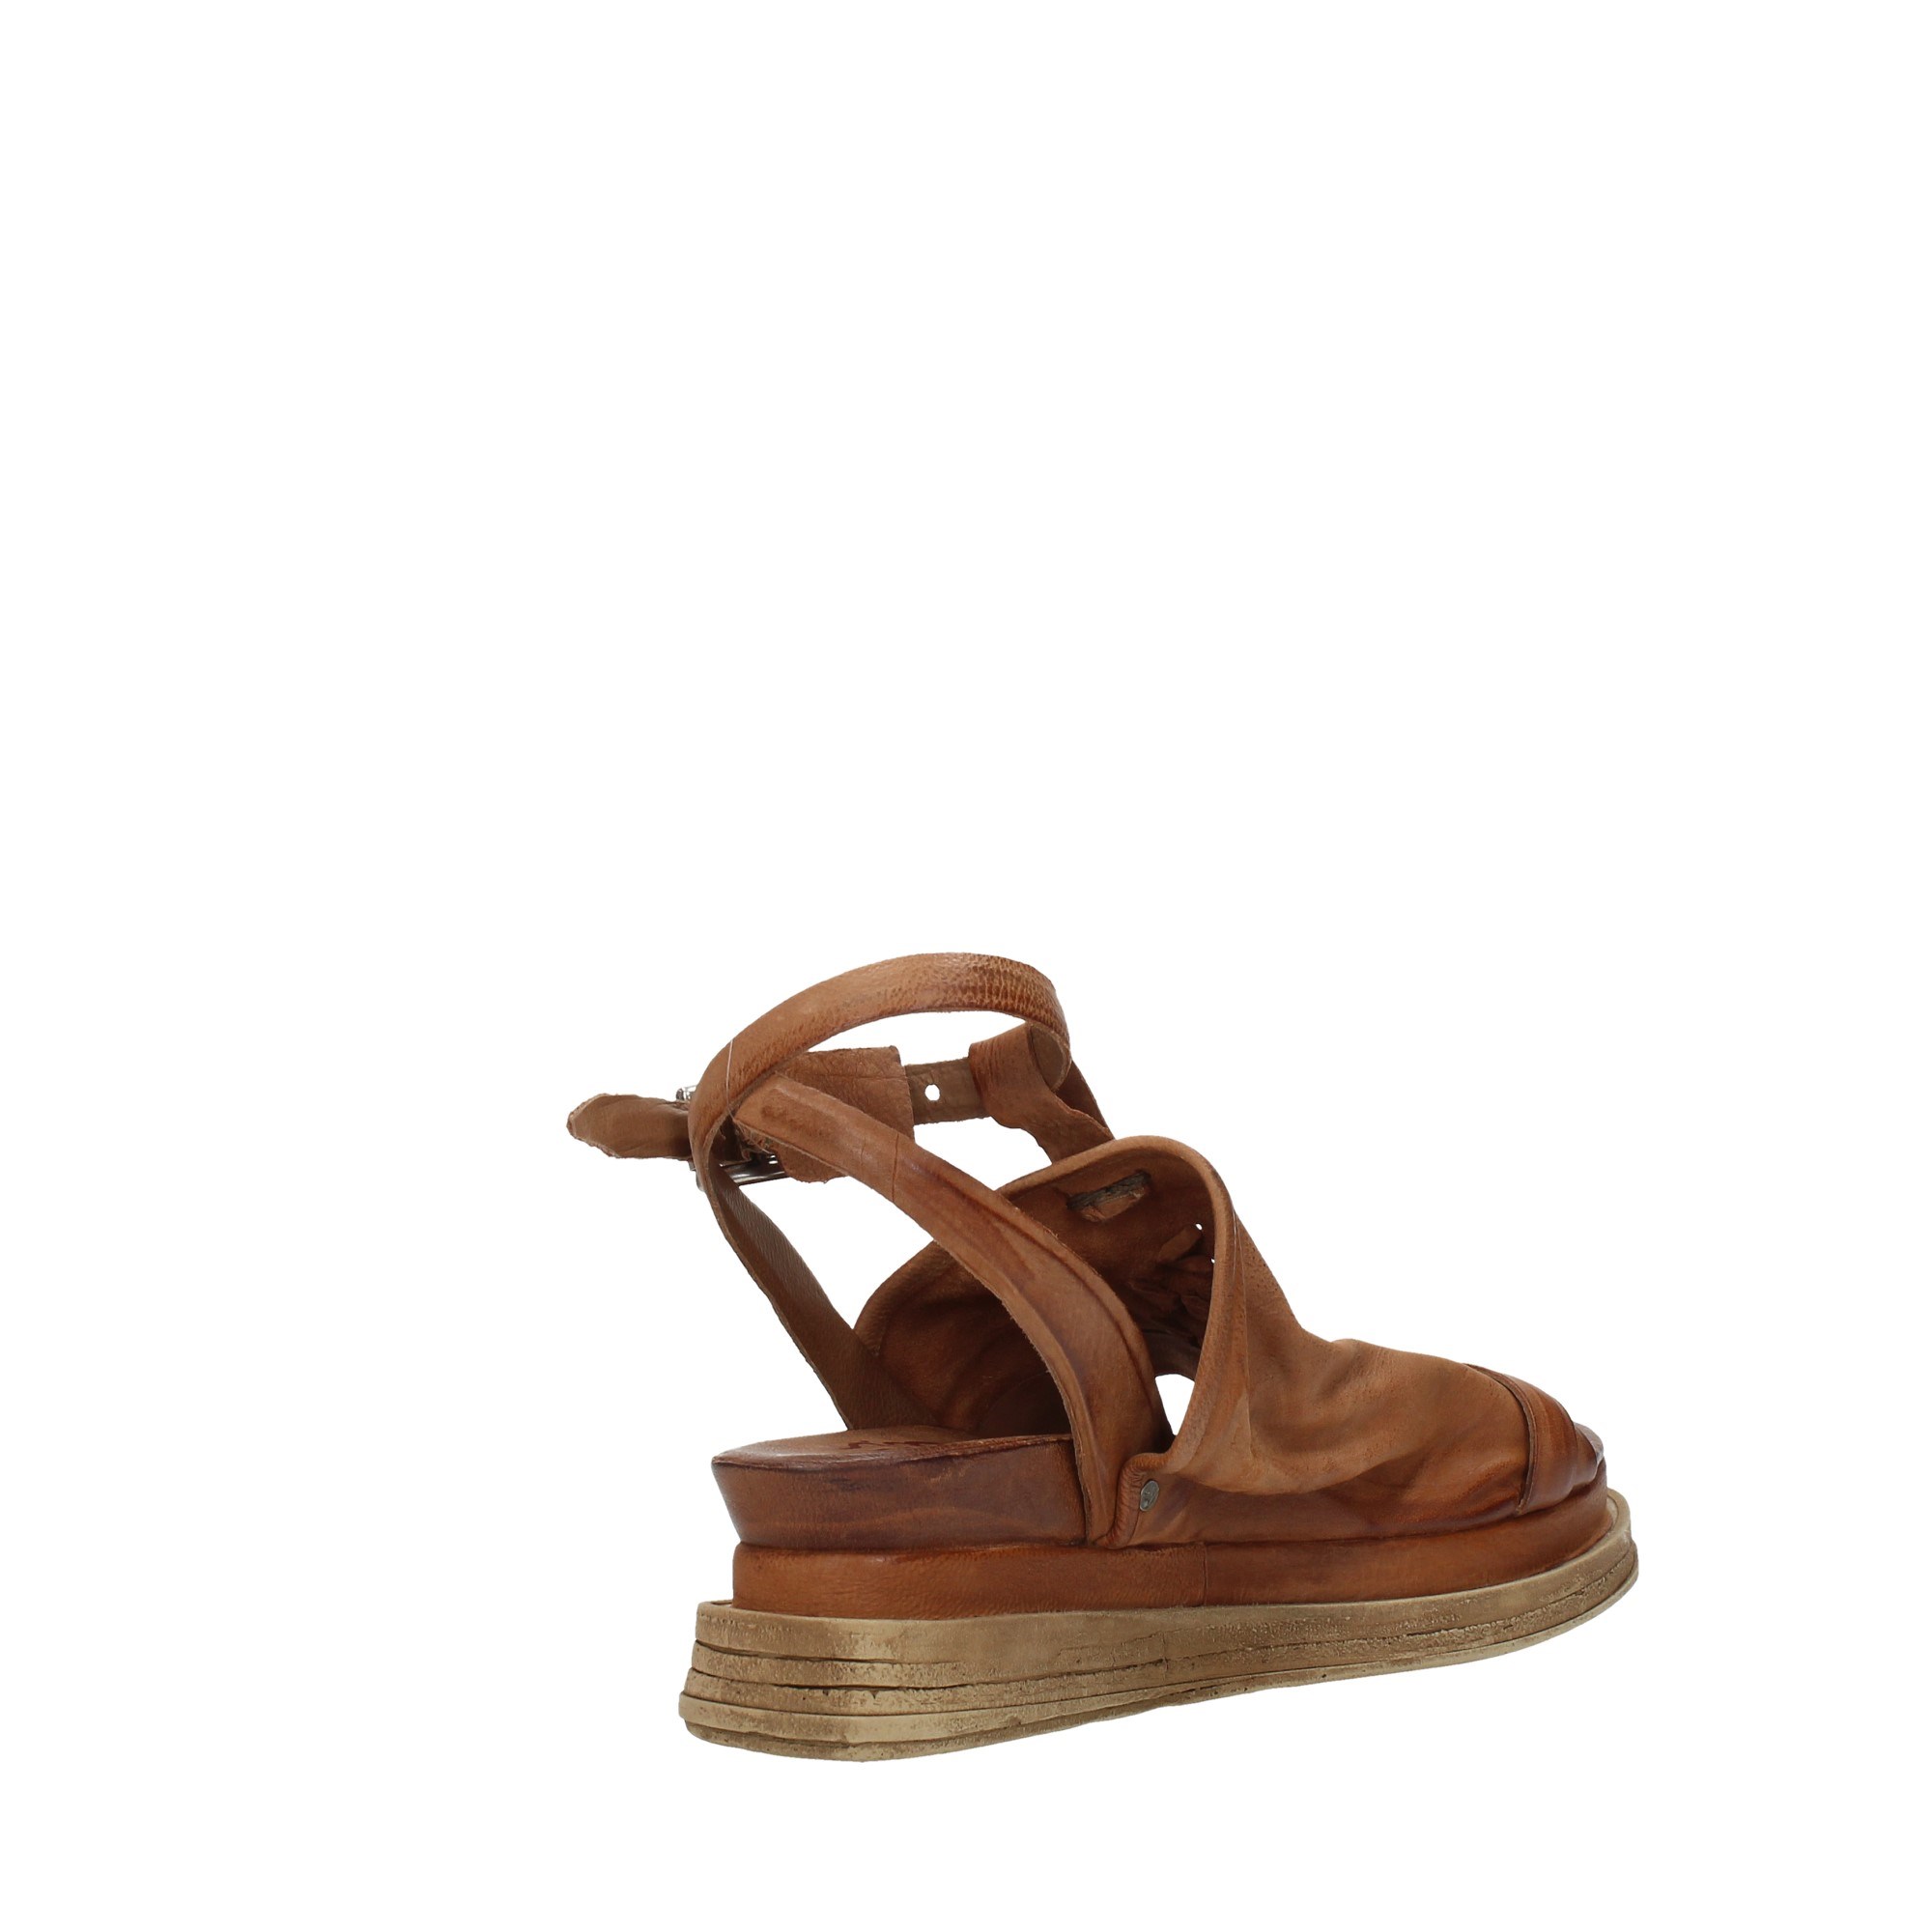 As98 Shoes Women Wedge Sandals A15021